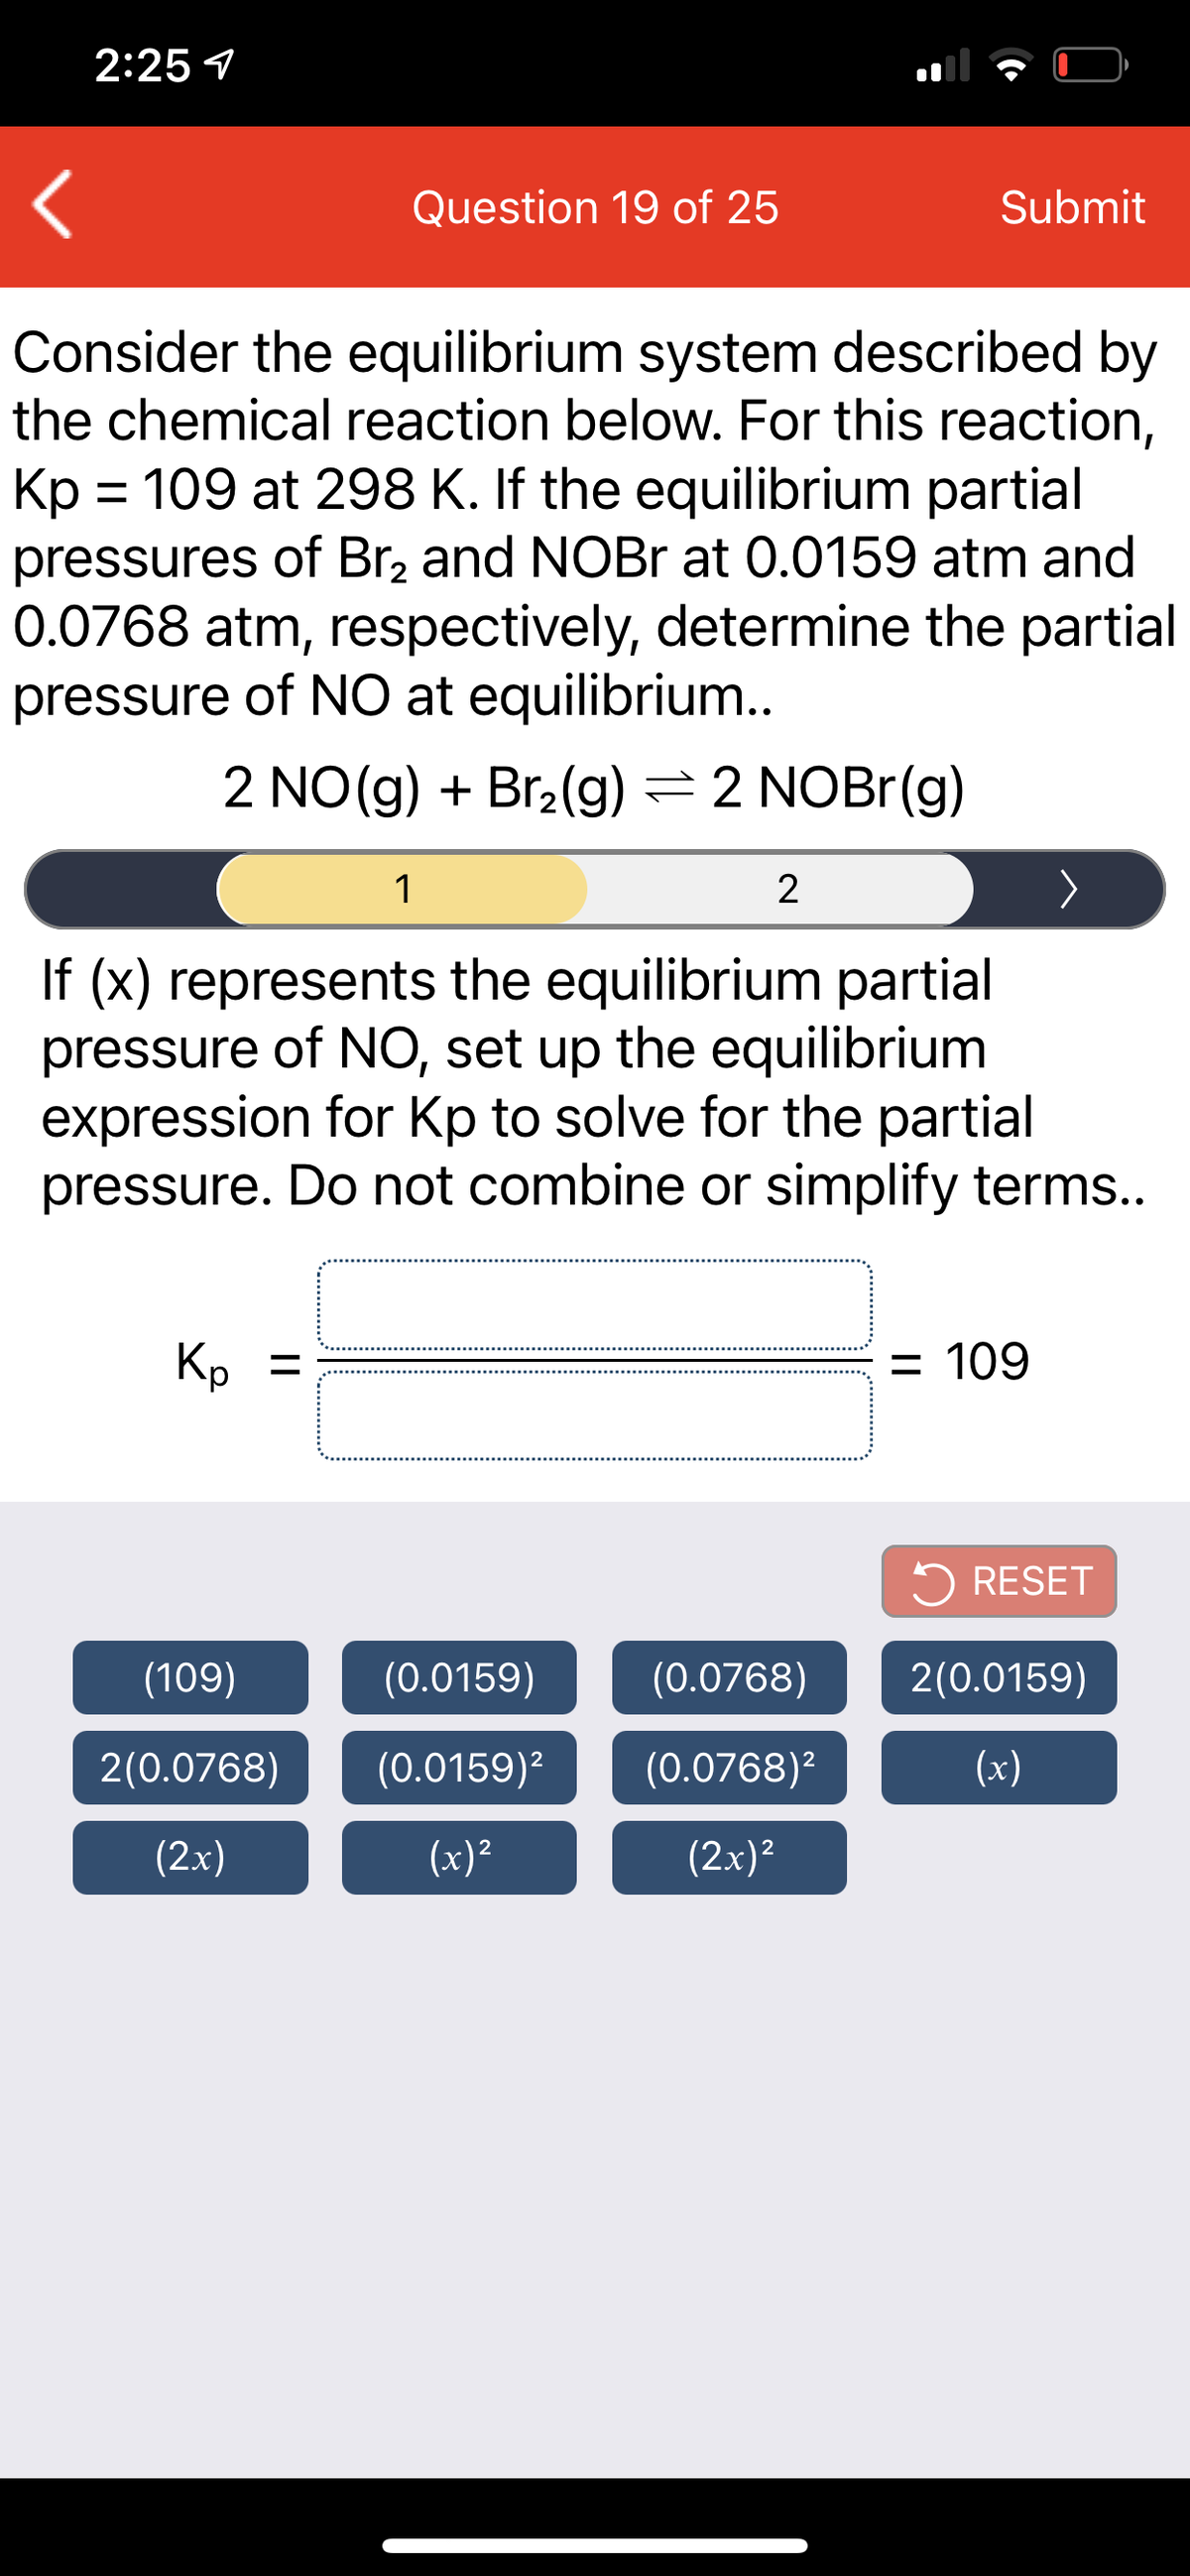 2:25 1
Question 19 of 25
Submit
Consider the equilibrium system described by
the chemical reaction below. For this reaction,
Kp = 109 at 298 K. If the equilibrium partial
pressures of Br, and NOBR at 0.0159 atm and
0.0768 atm, respectively, determine the partial
pressure of NO at equilibrium..
2 NO(g) + Br2(g) = 2 NOBr(g)
1
2
If (x) represents the equilibrium partial
pressure of NO, set up the equilibrium
expression for Kp to solve for the partial
pressure. Do not combine or simplify terms..
Kp =
%3D
= 109
5 RESET
(109)
(0.0159)
(0.0768)
2(0.0159)
2(0.0768)
(0.0159)²
(0.0768)²
(x)
(2x)
(x)²
(2x)?
